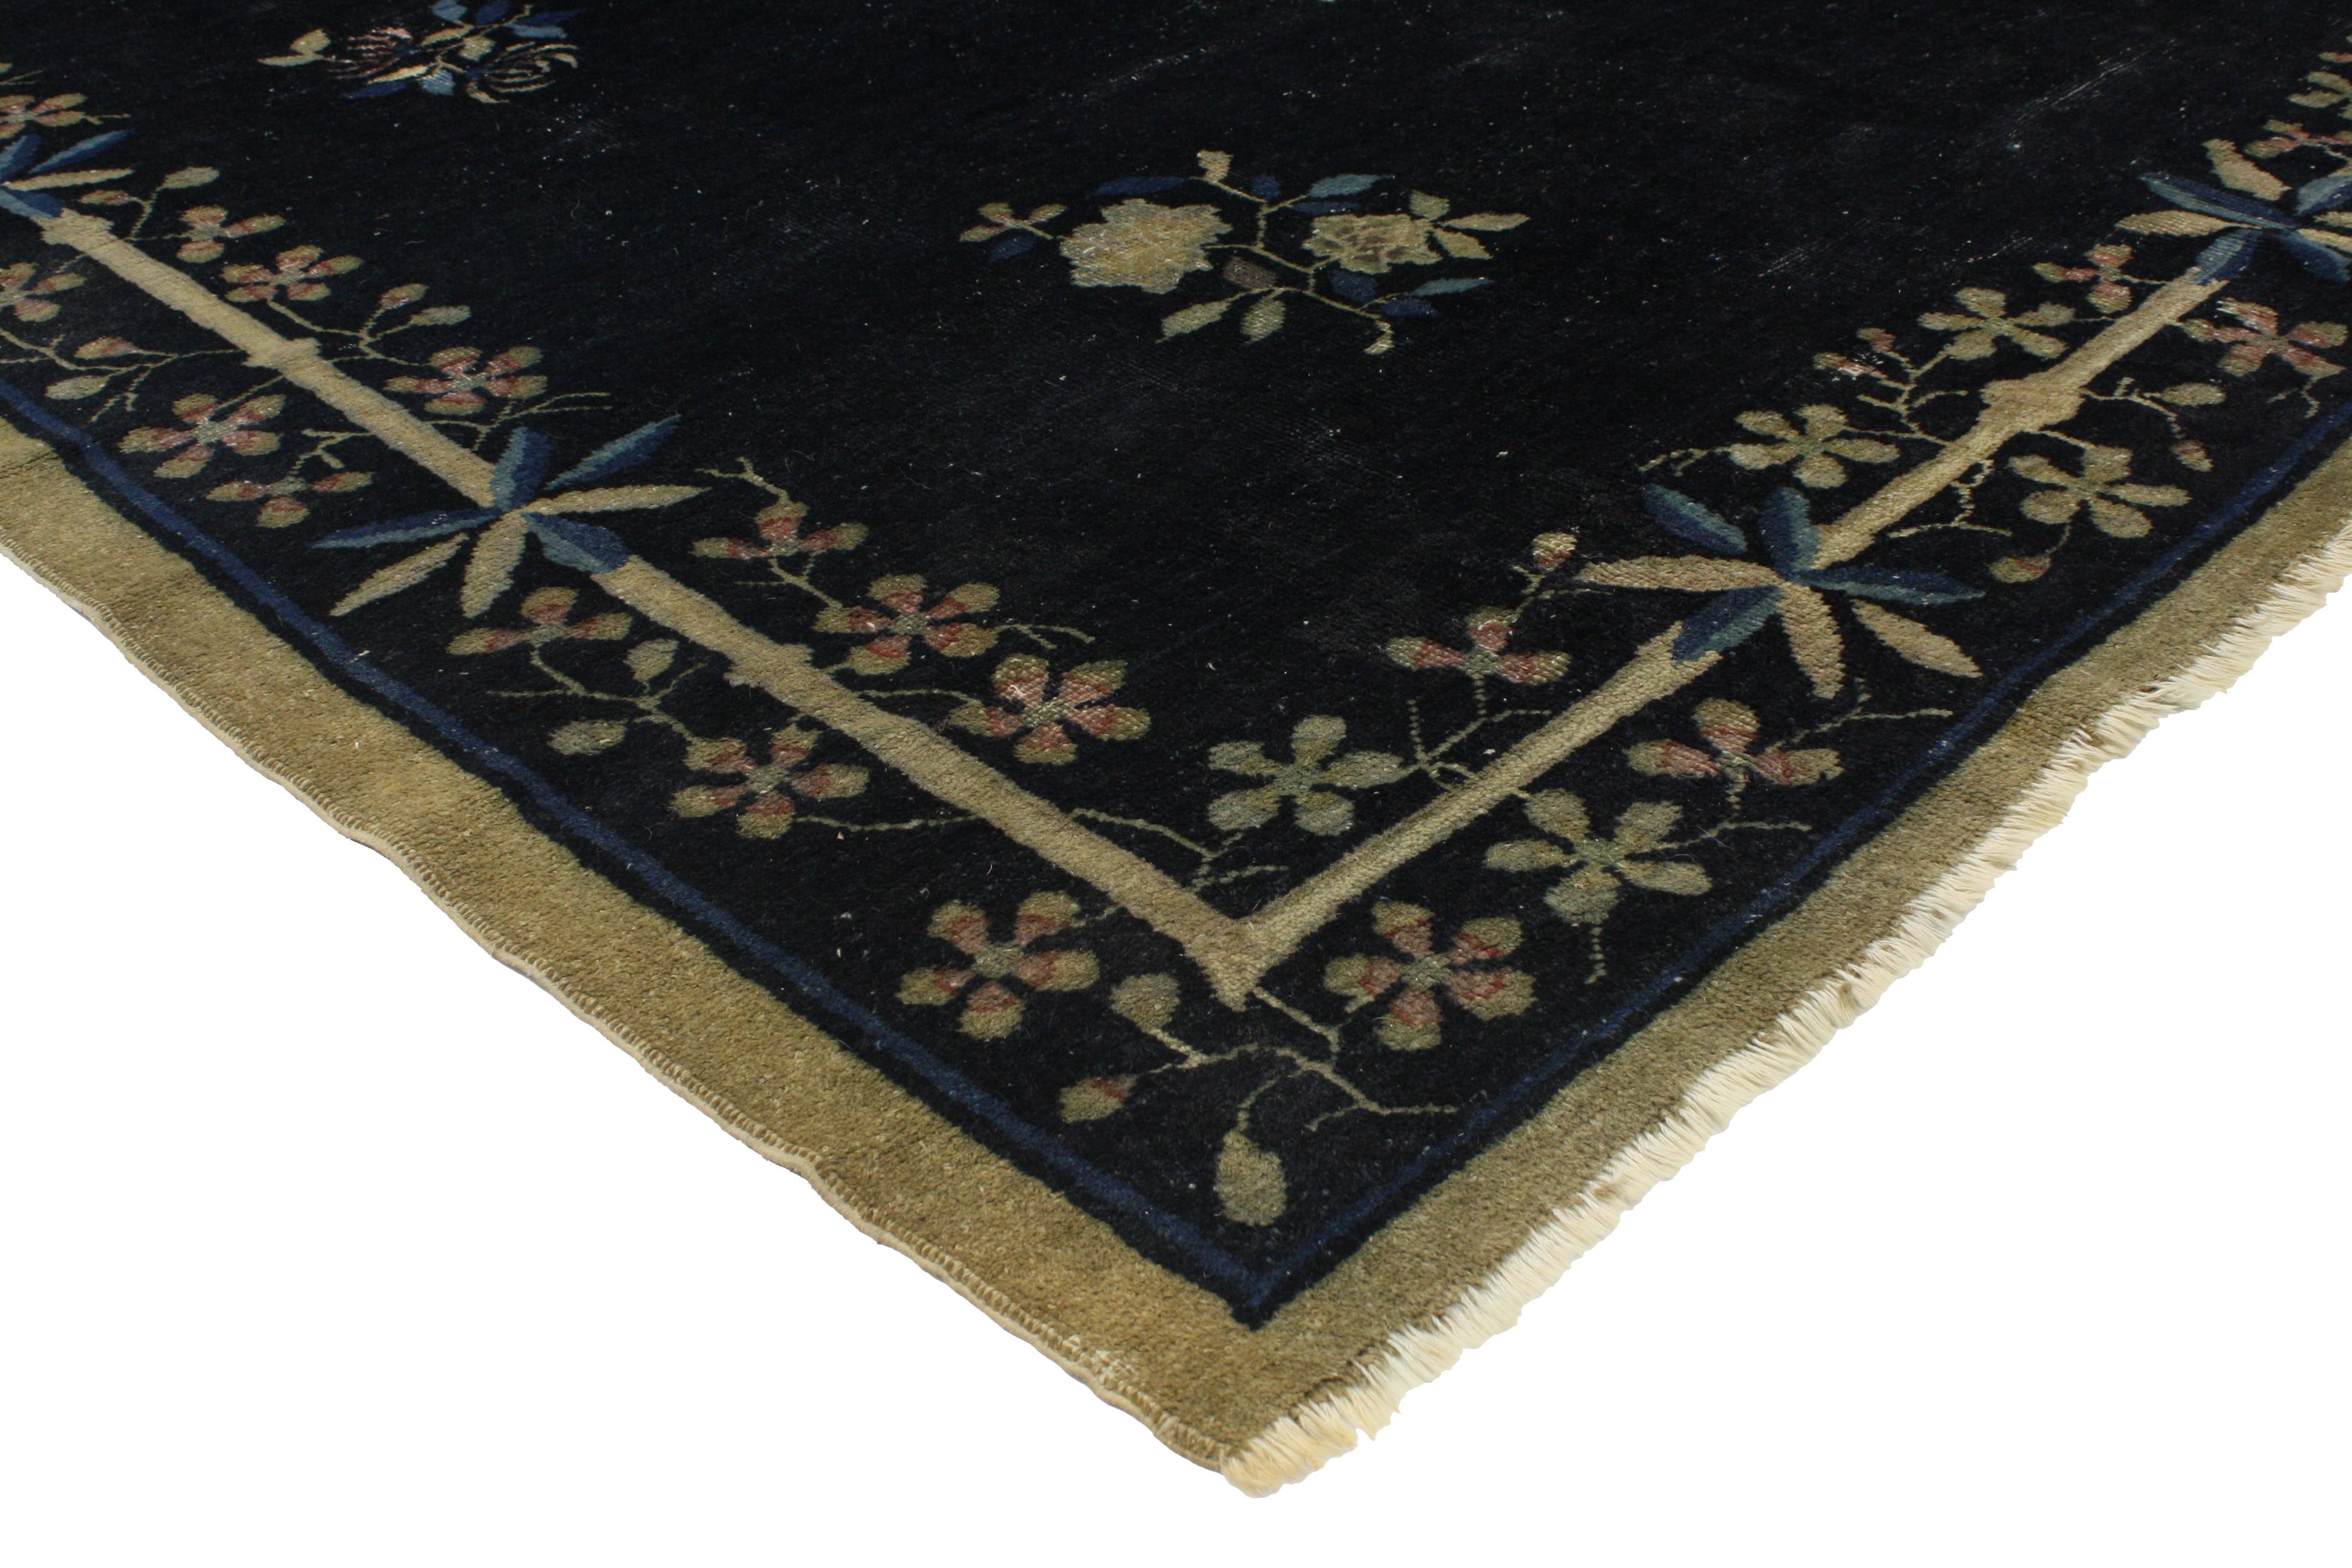 76682 distressed antique Chinese Peking rug with jazz age chinoiserie style. This hand knotted wool antique Chinese Peking rug features a variety of elegant floral motifs spread across an abrashed ink blue field. Large blooming lotuses float in the